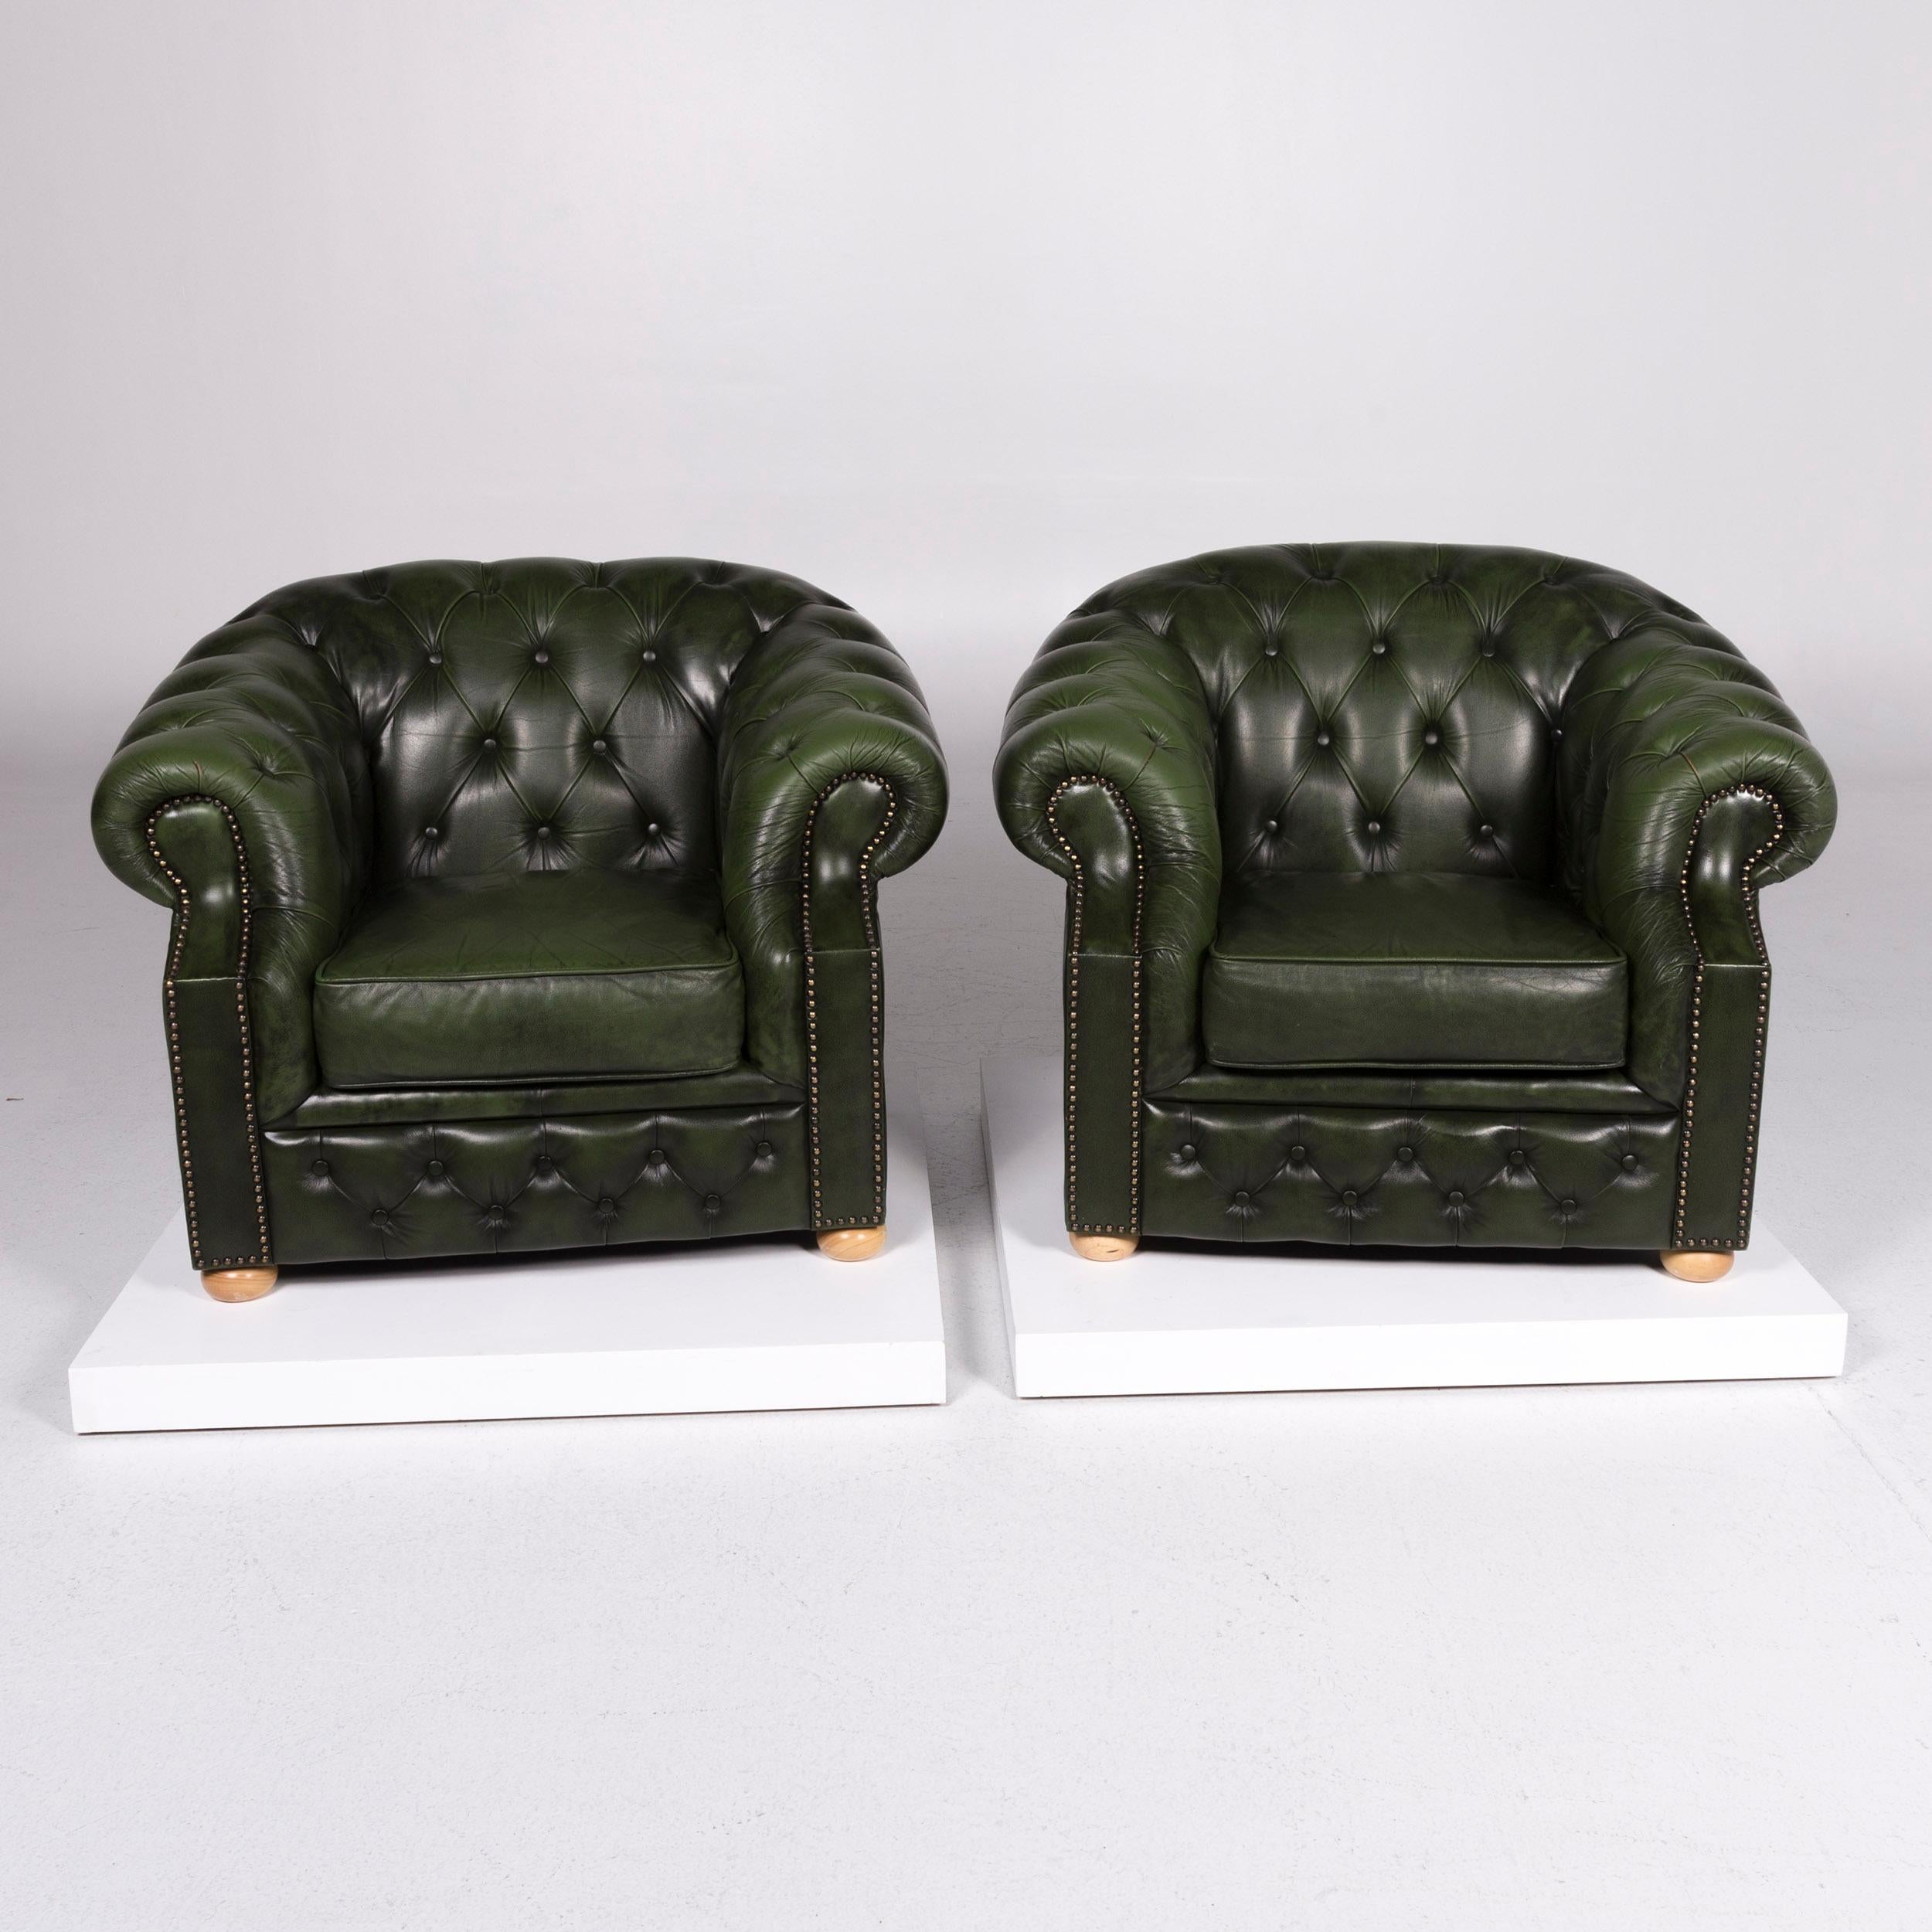 We bring to you a Centurion leather armchair set Chesterfield green.

 Product measurements in centimeters:
 
Measures: Depth 98
Width 105
Height 81
Seat-height 44
Rest-height 68
Seat-depth 57
Seat-width 49
Back-height 42.
  